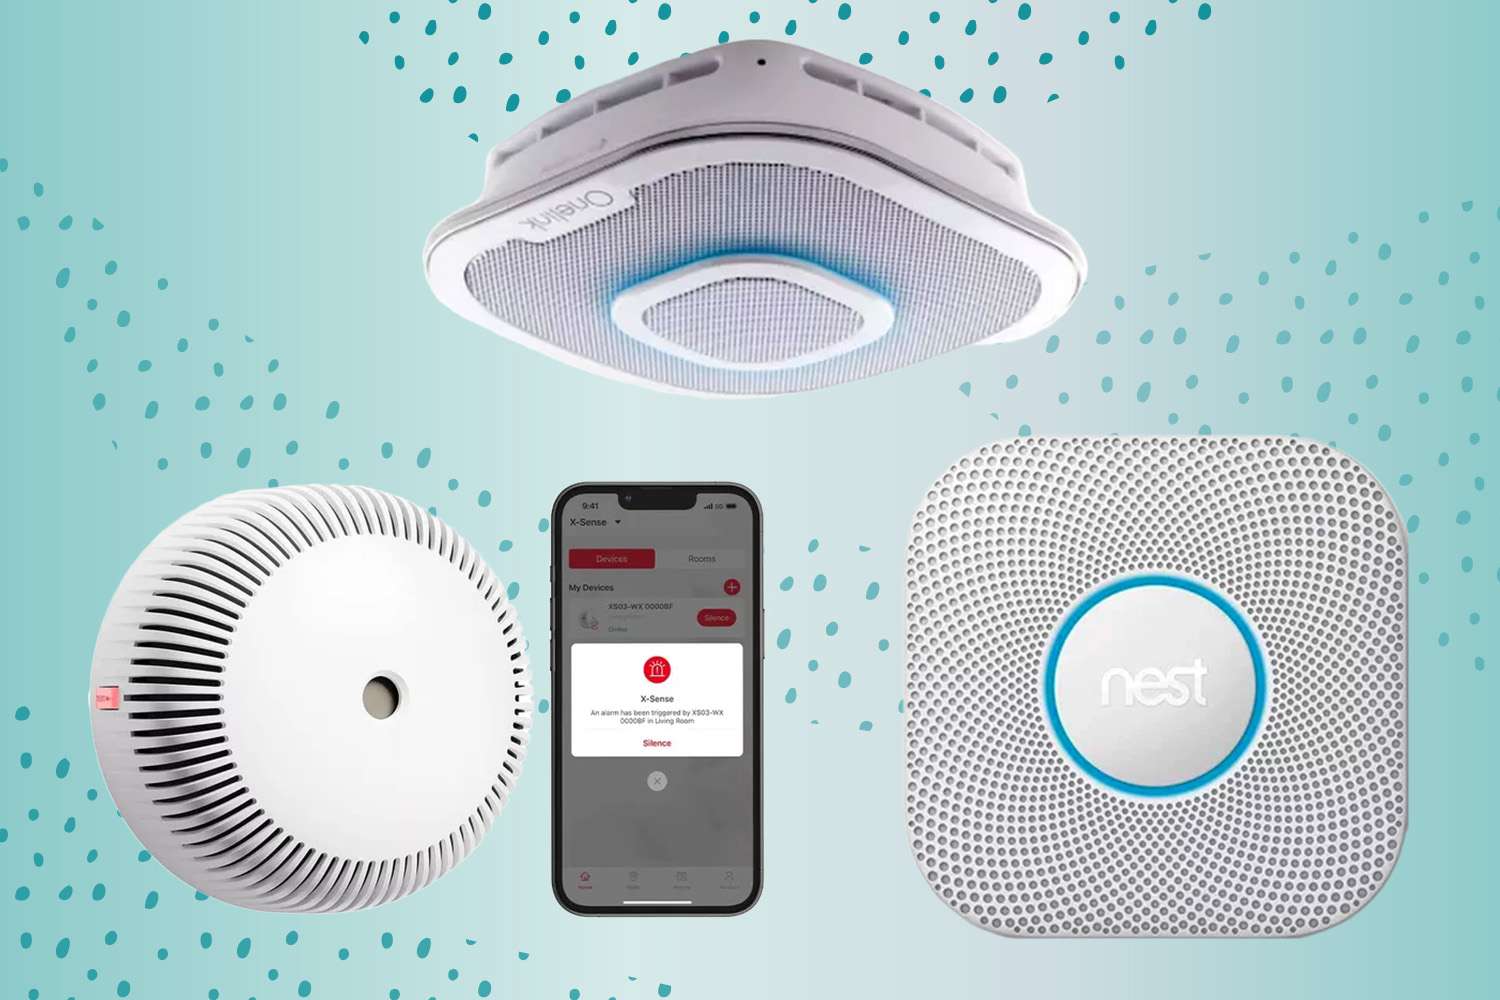 Smart Smoke Detectors - Smart home safety devices